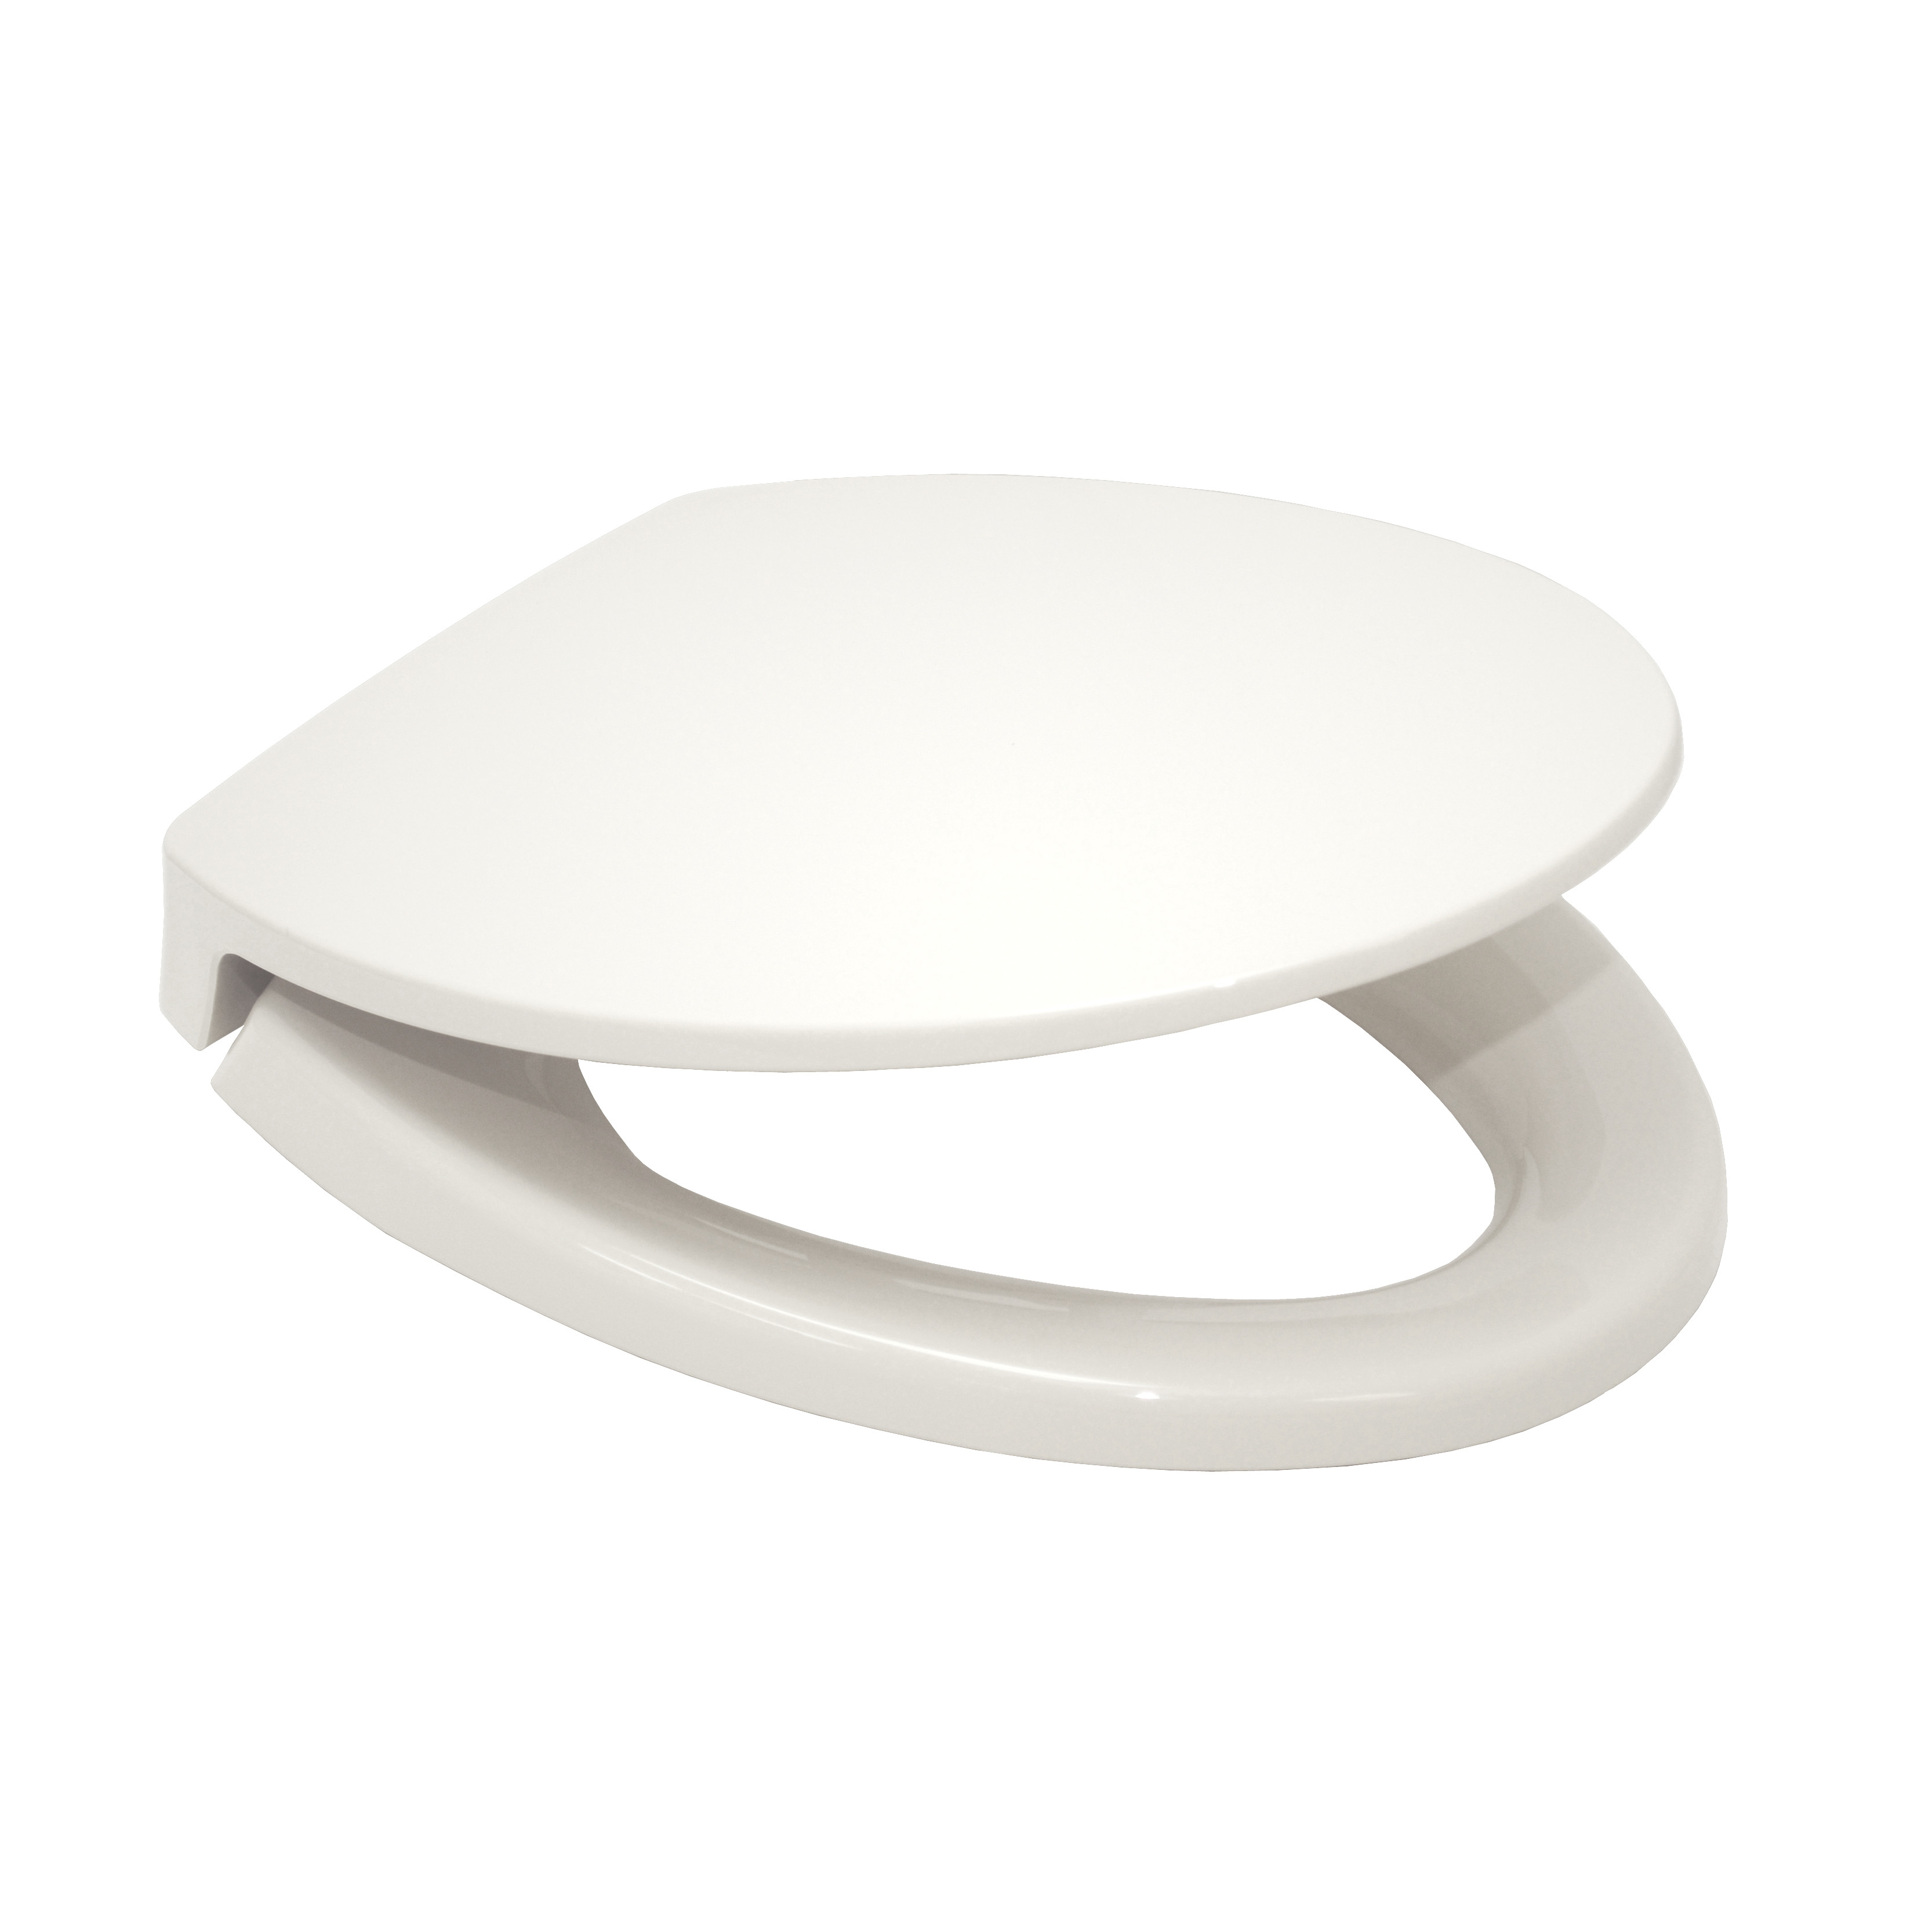 oval toilet seat lid covers